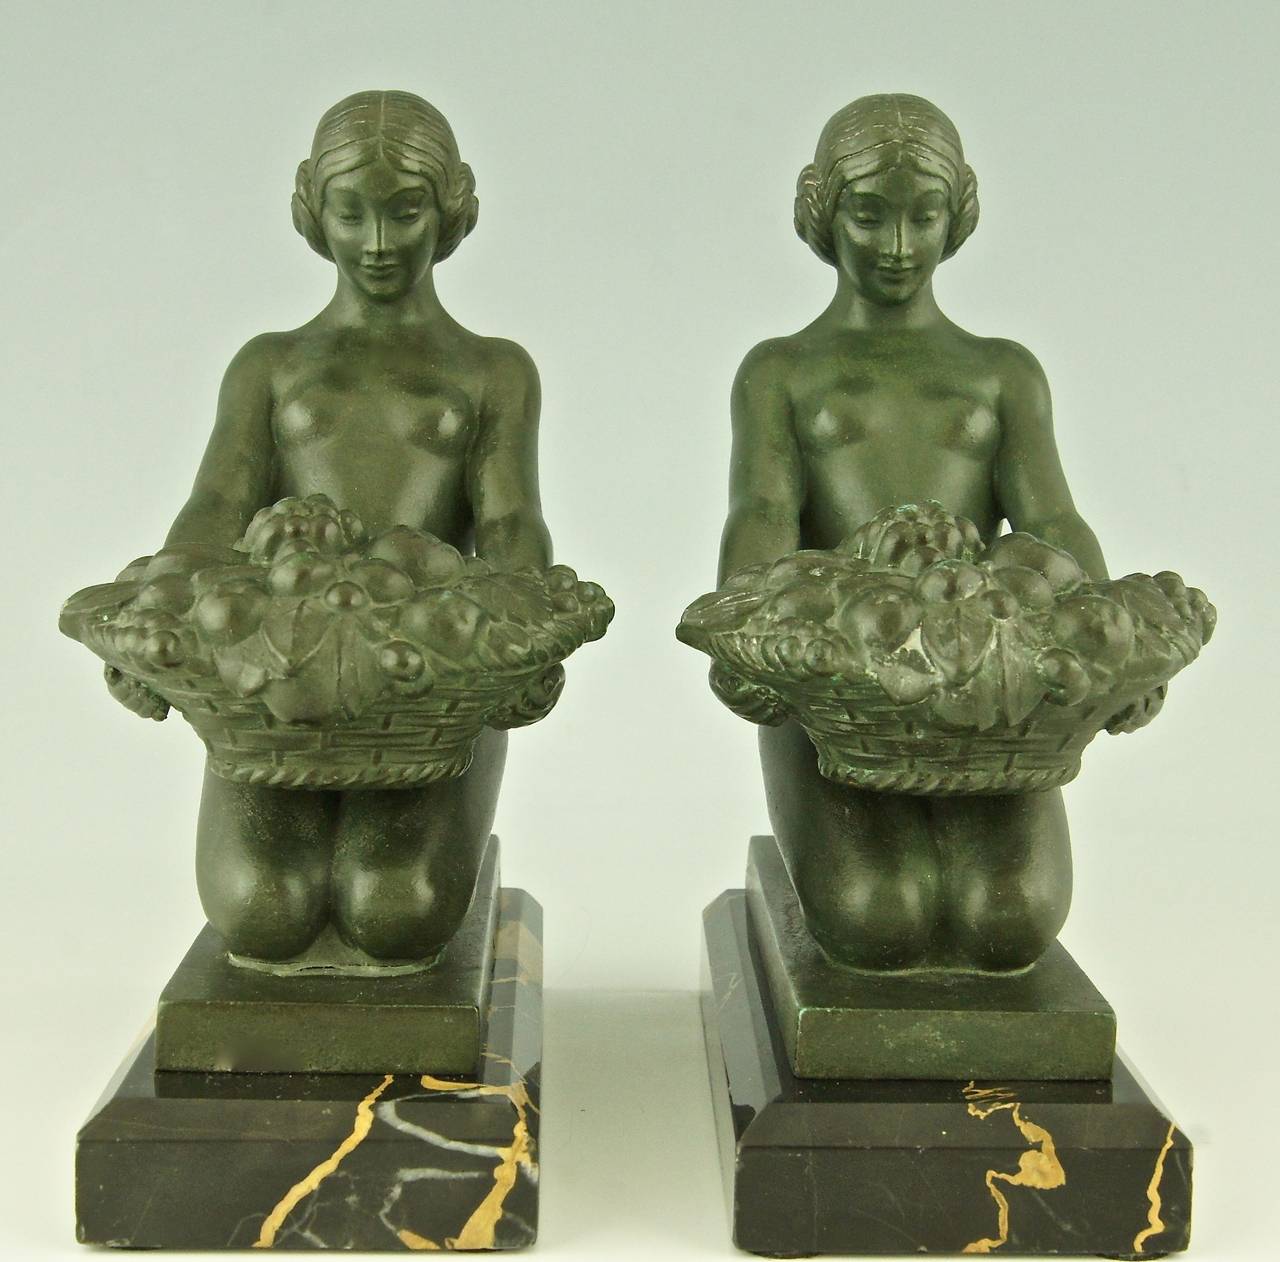 Patinated Art Deco Bookends with Nudes by Max Le Verrier, France, 1930